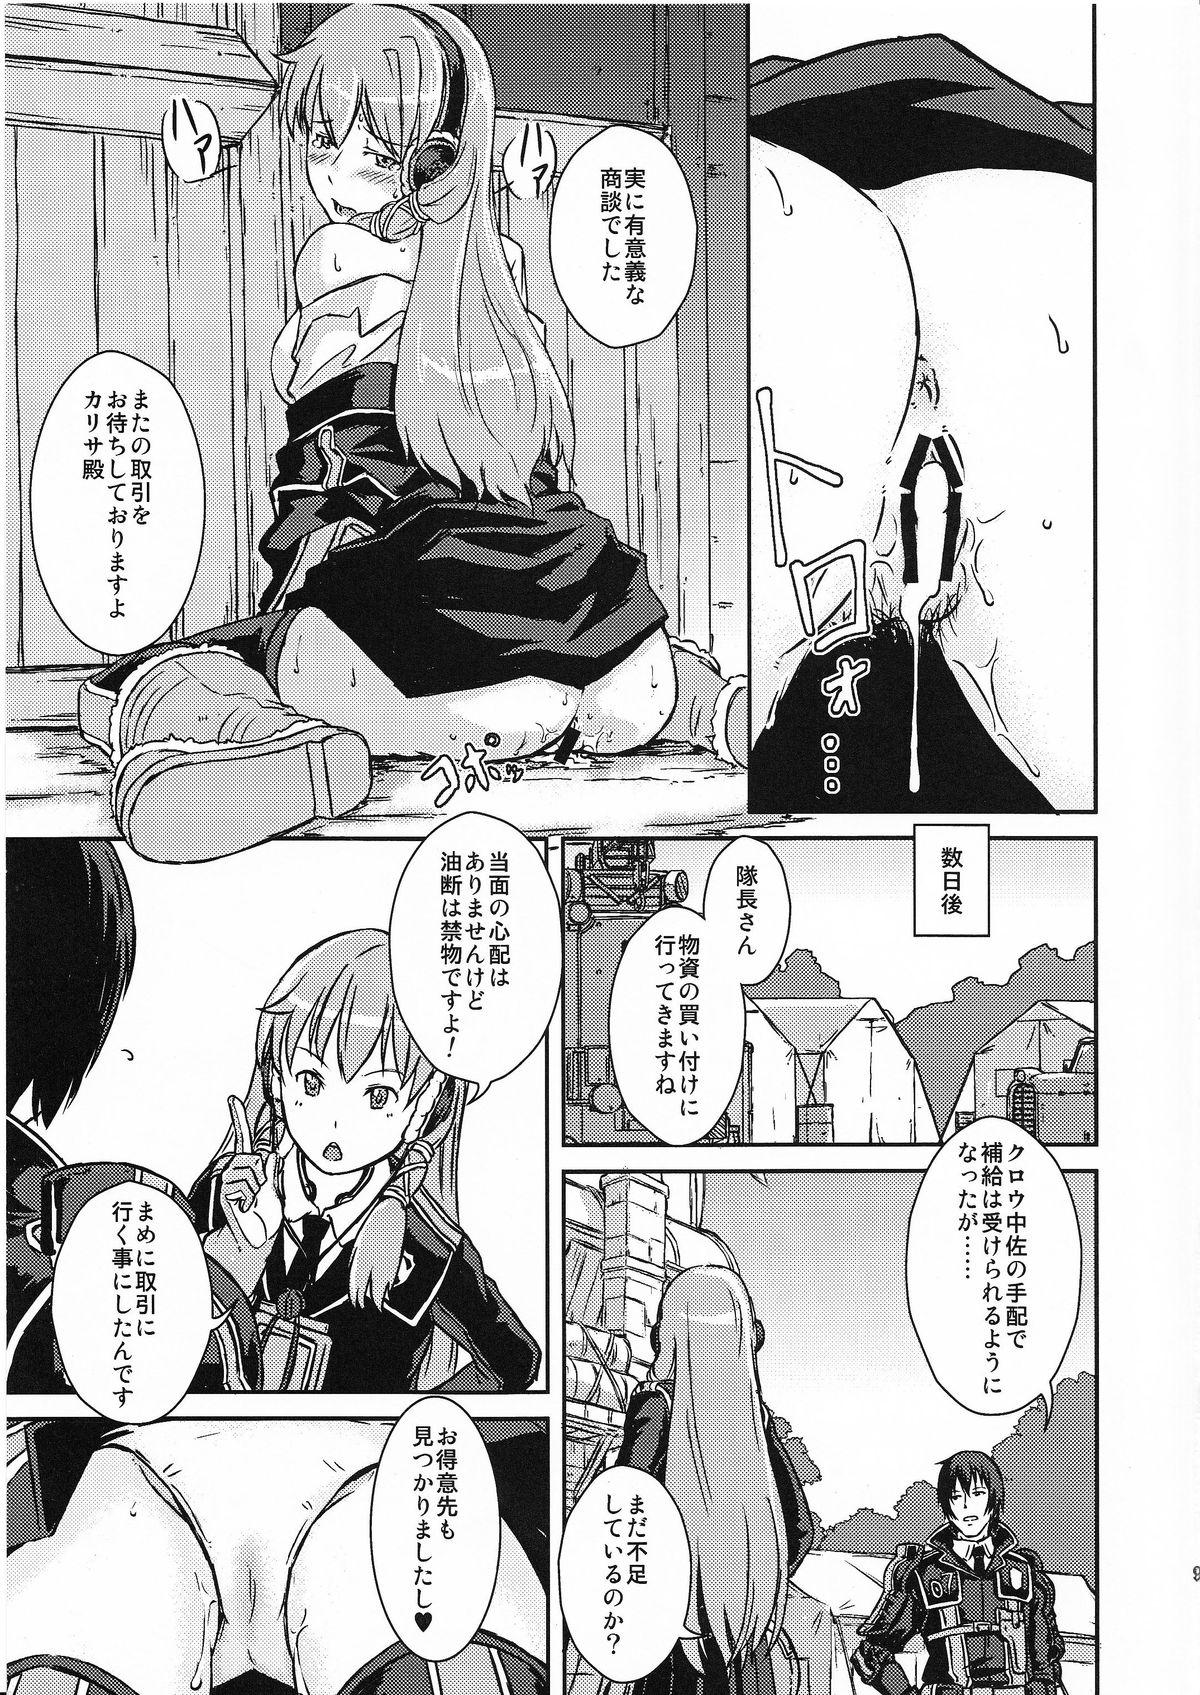 Ejaculations Military Life of Squard 422 NO.2 - Valkyria chronicles Valkyria chronicles 3 Sexcams - Page 8